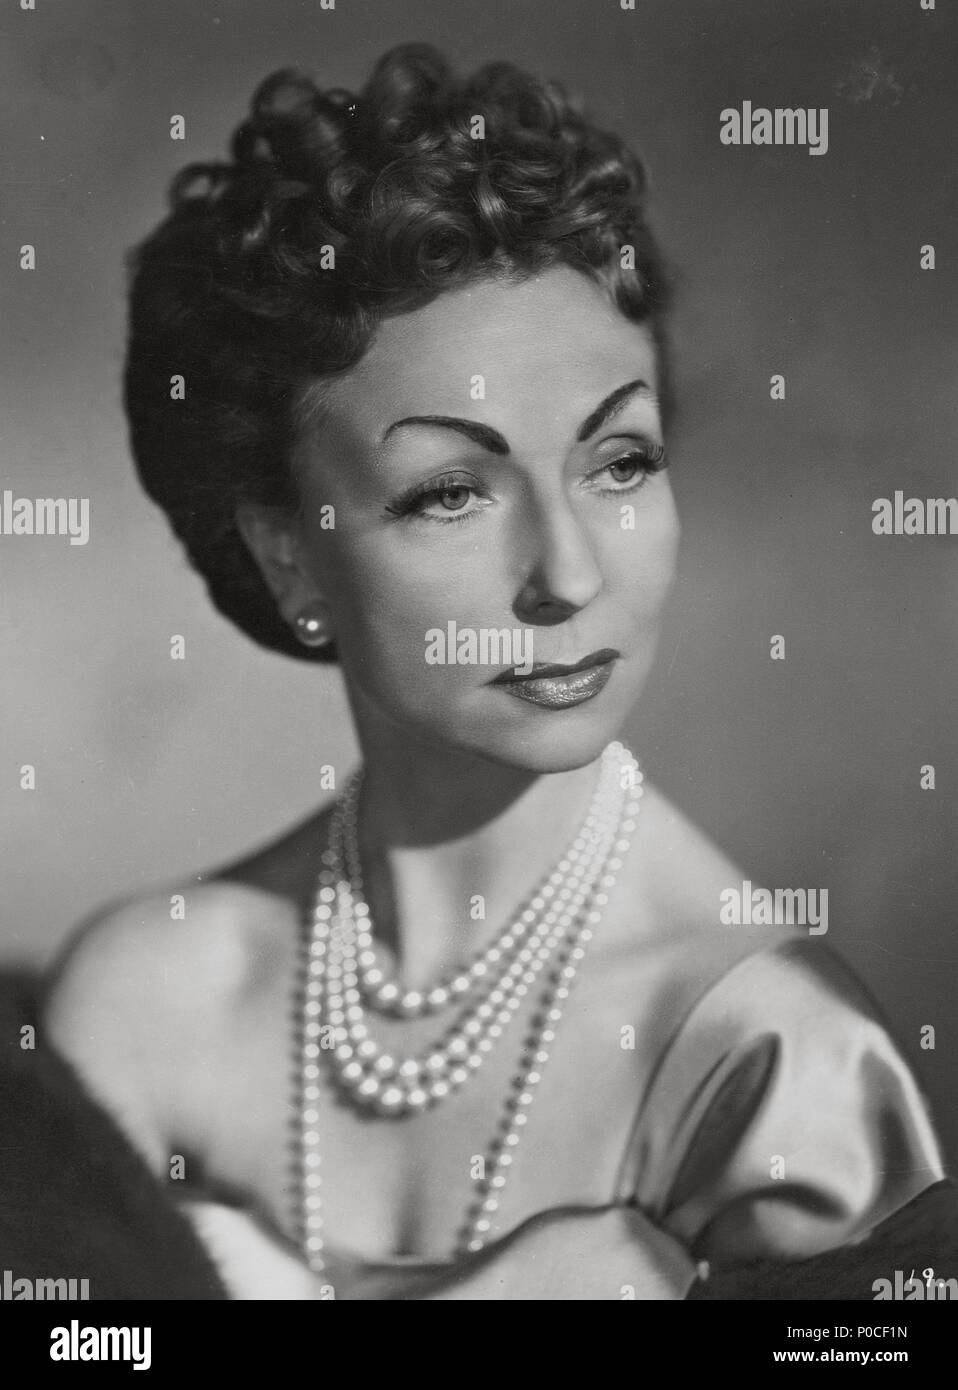 Agnes Moorehead High Resolution Stock Photography and Images - Alamy